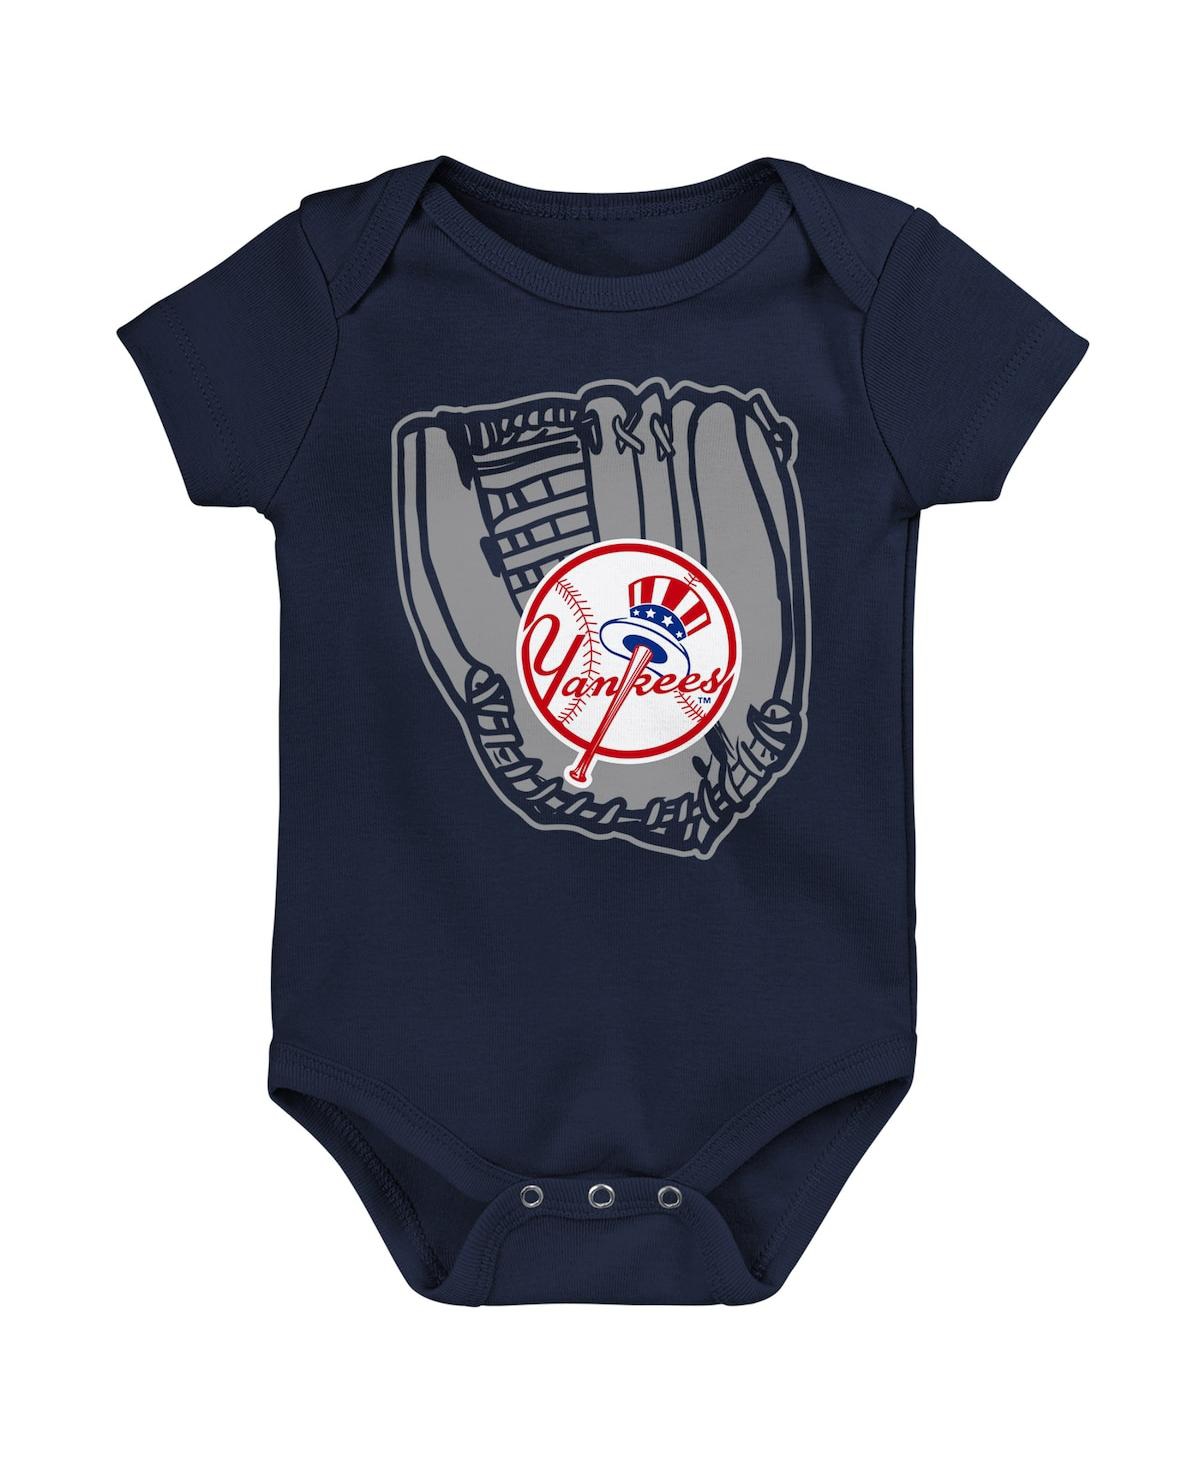 Outerstuff Newborn and Infant Boys and Girls Heather Gray, Navy, White New York Yankees Minor League Player Thr Heather Gray,Navy,White